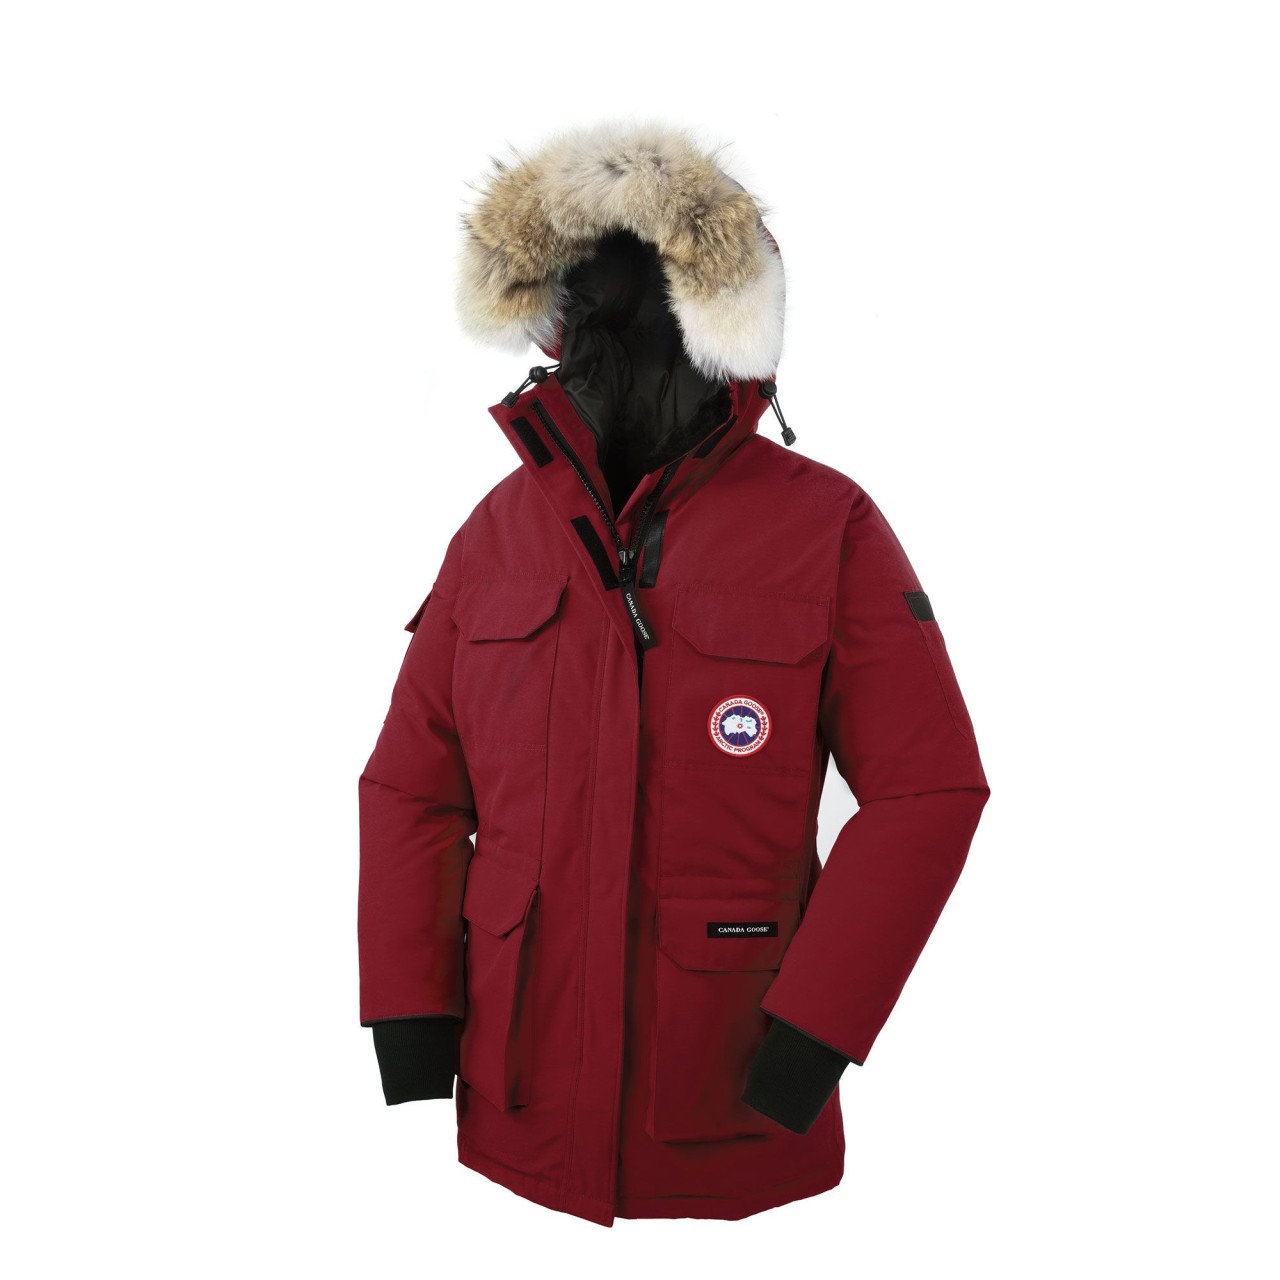 Canada Goose hats replica 2016 - canada goose jacket sale | canada goose jackets outlet store